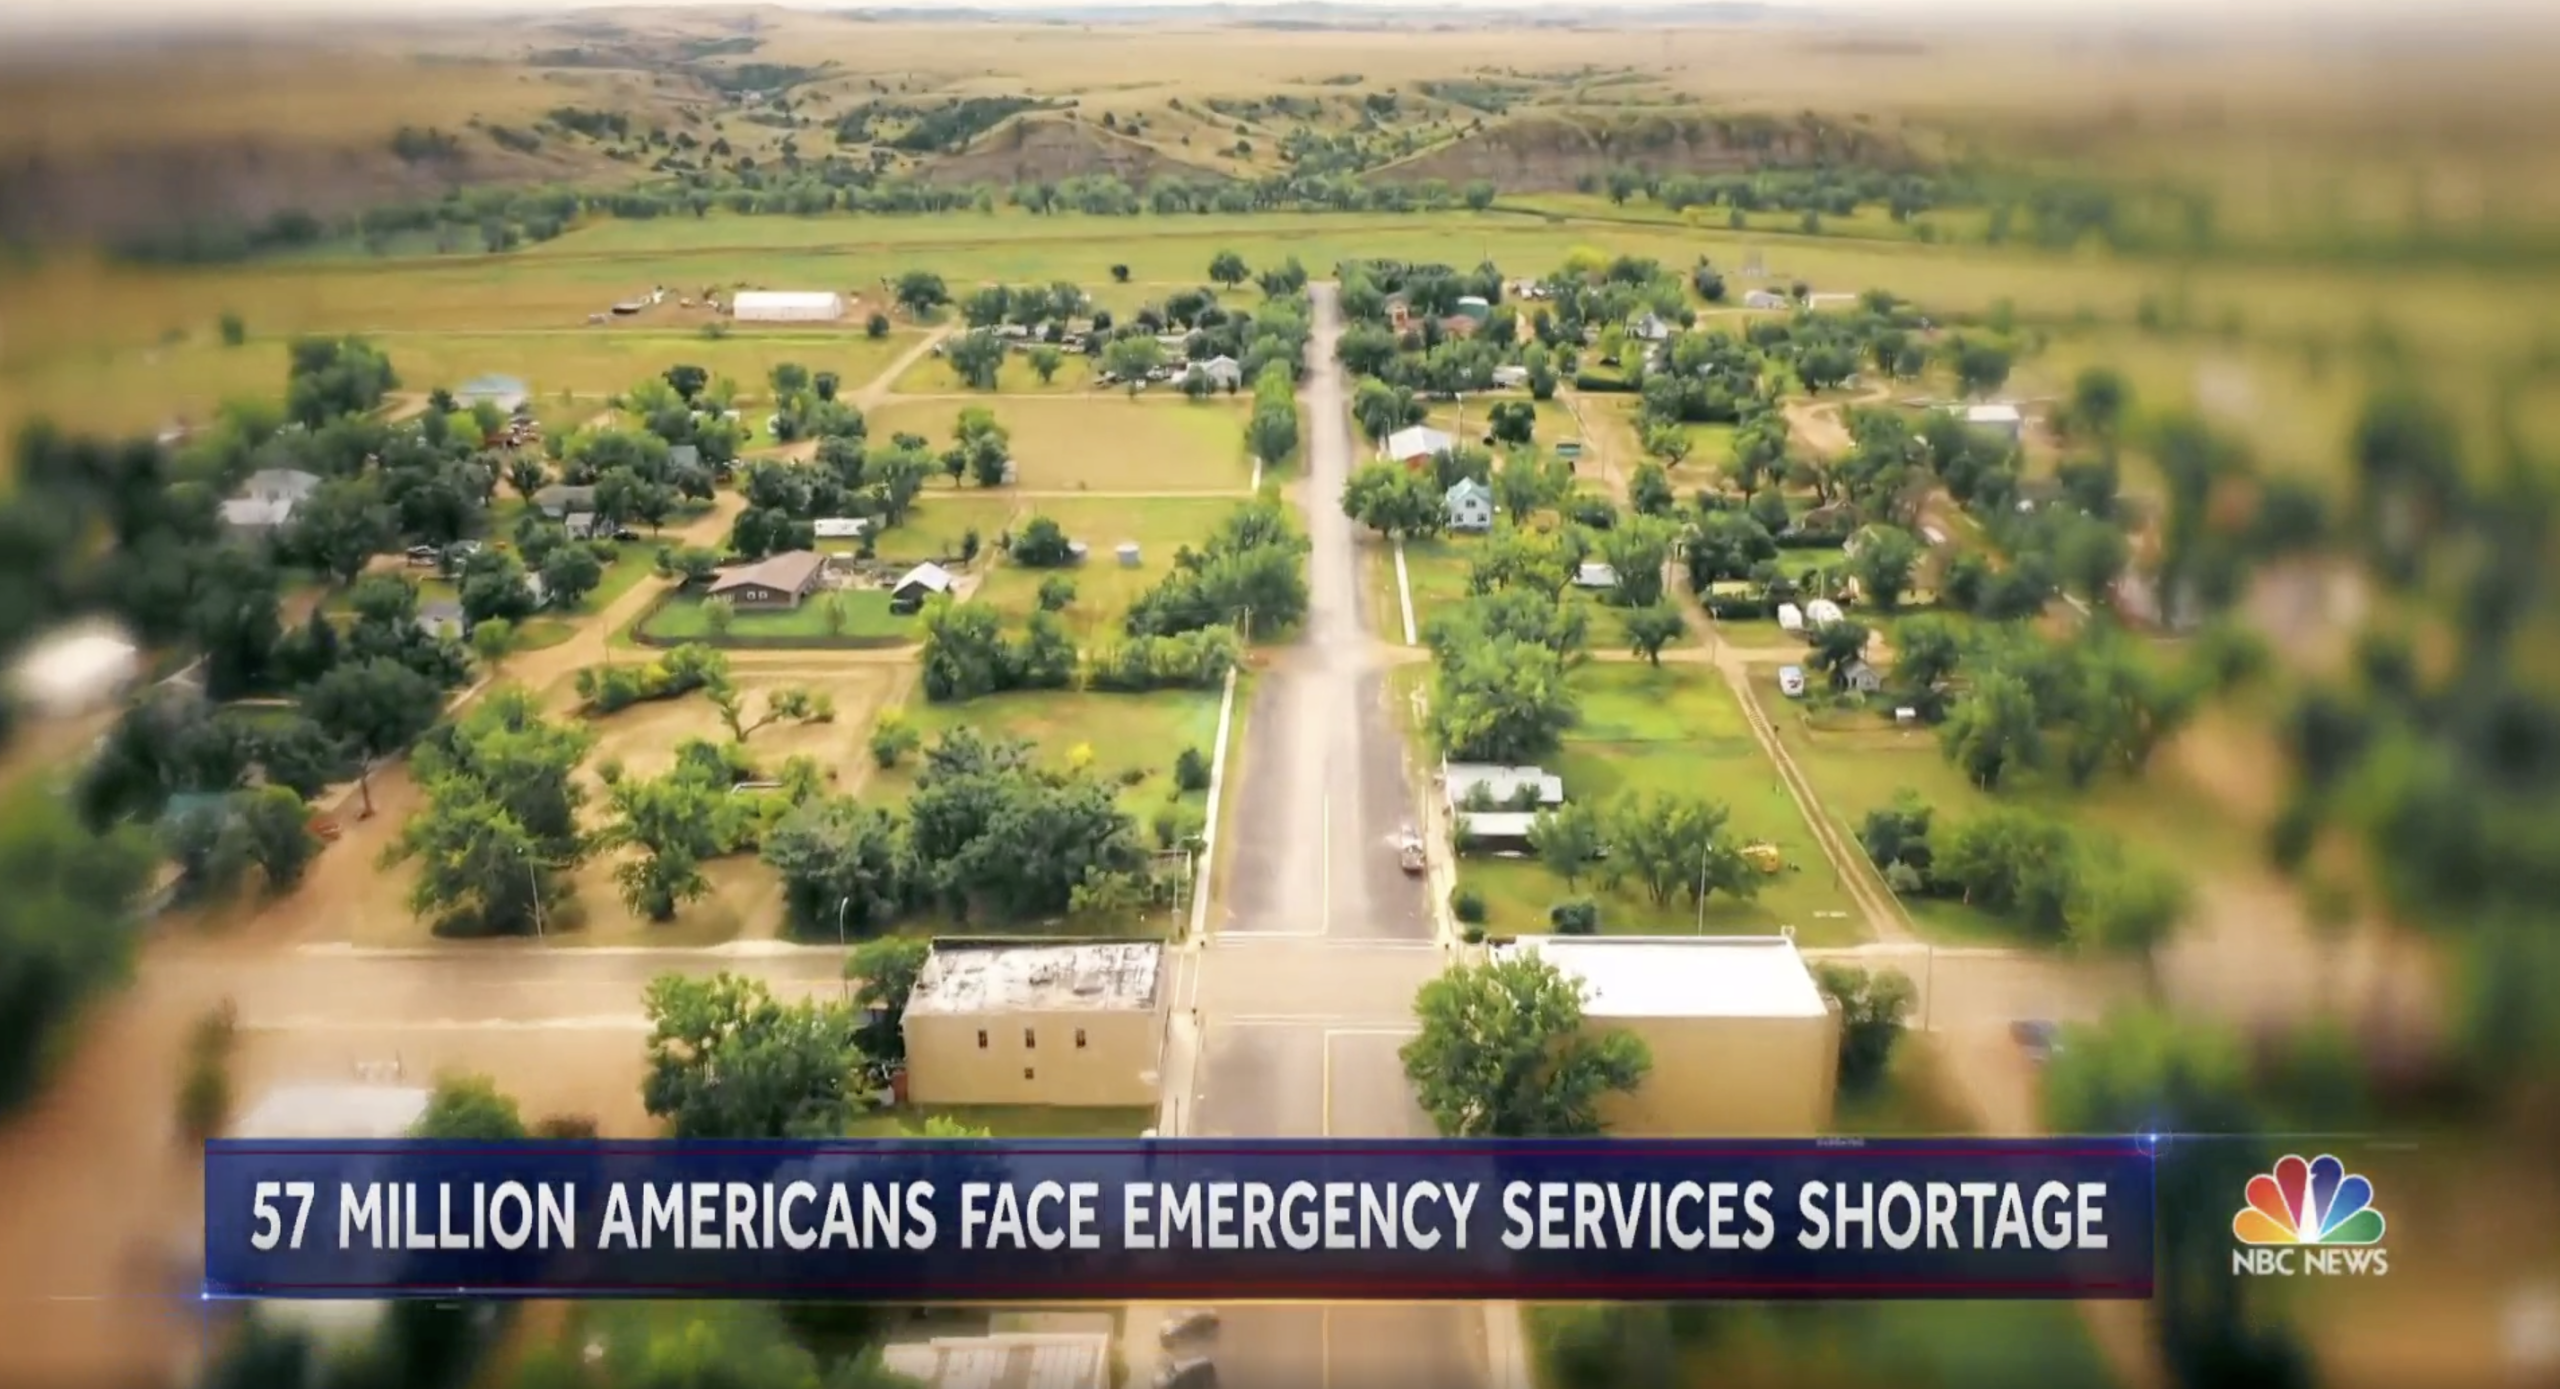 Study finds rural residents more likely to live far from ambulance stations